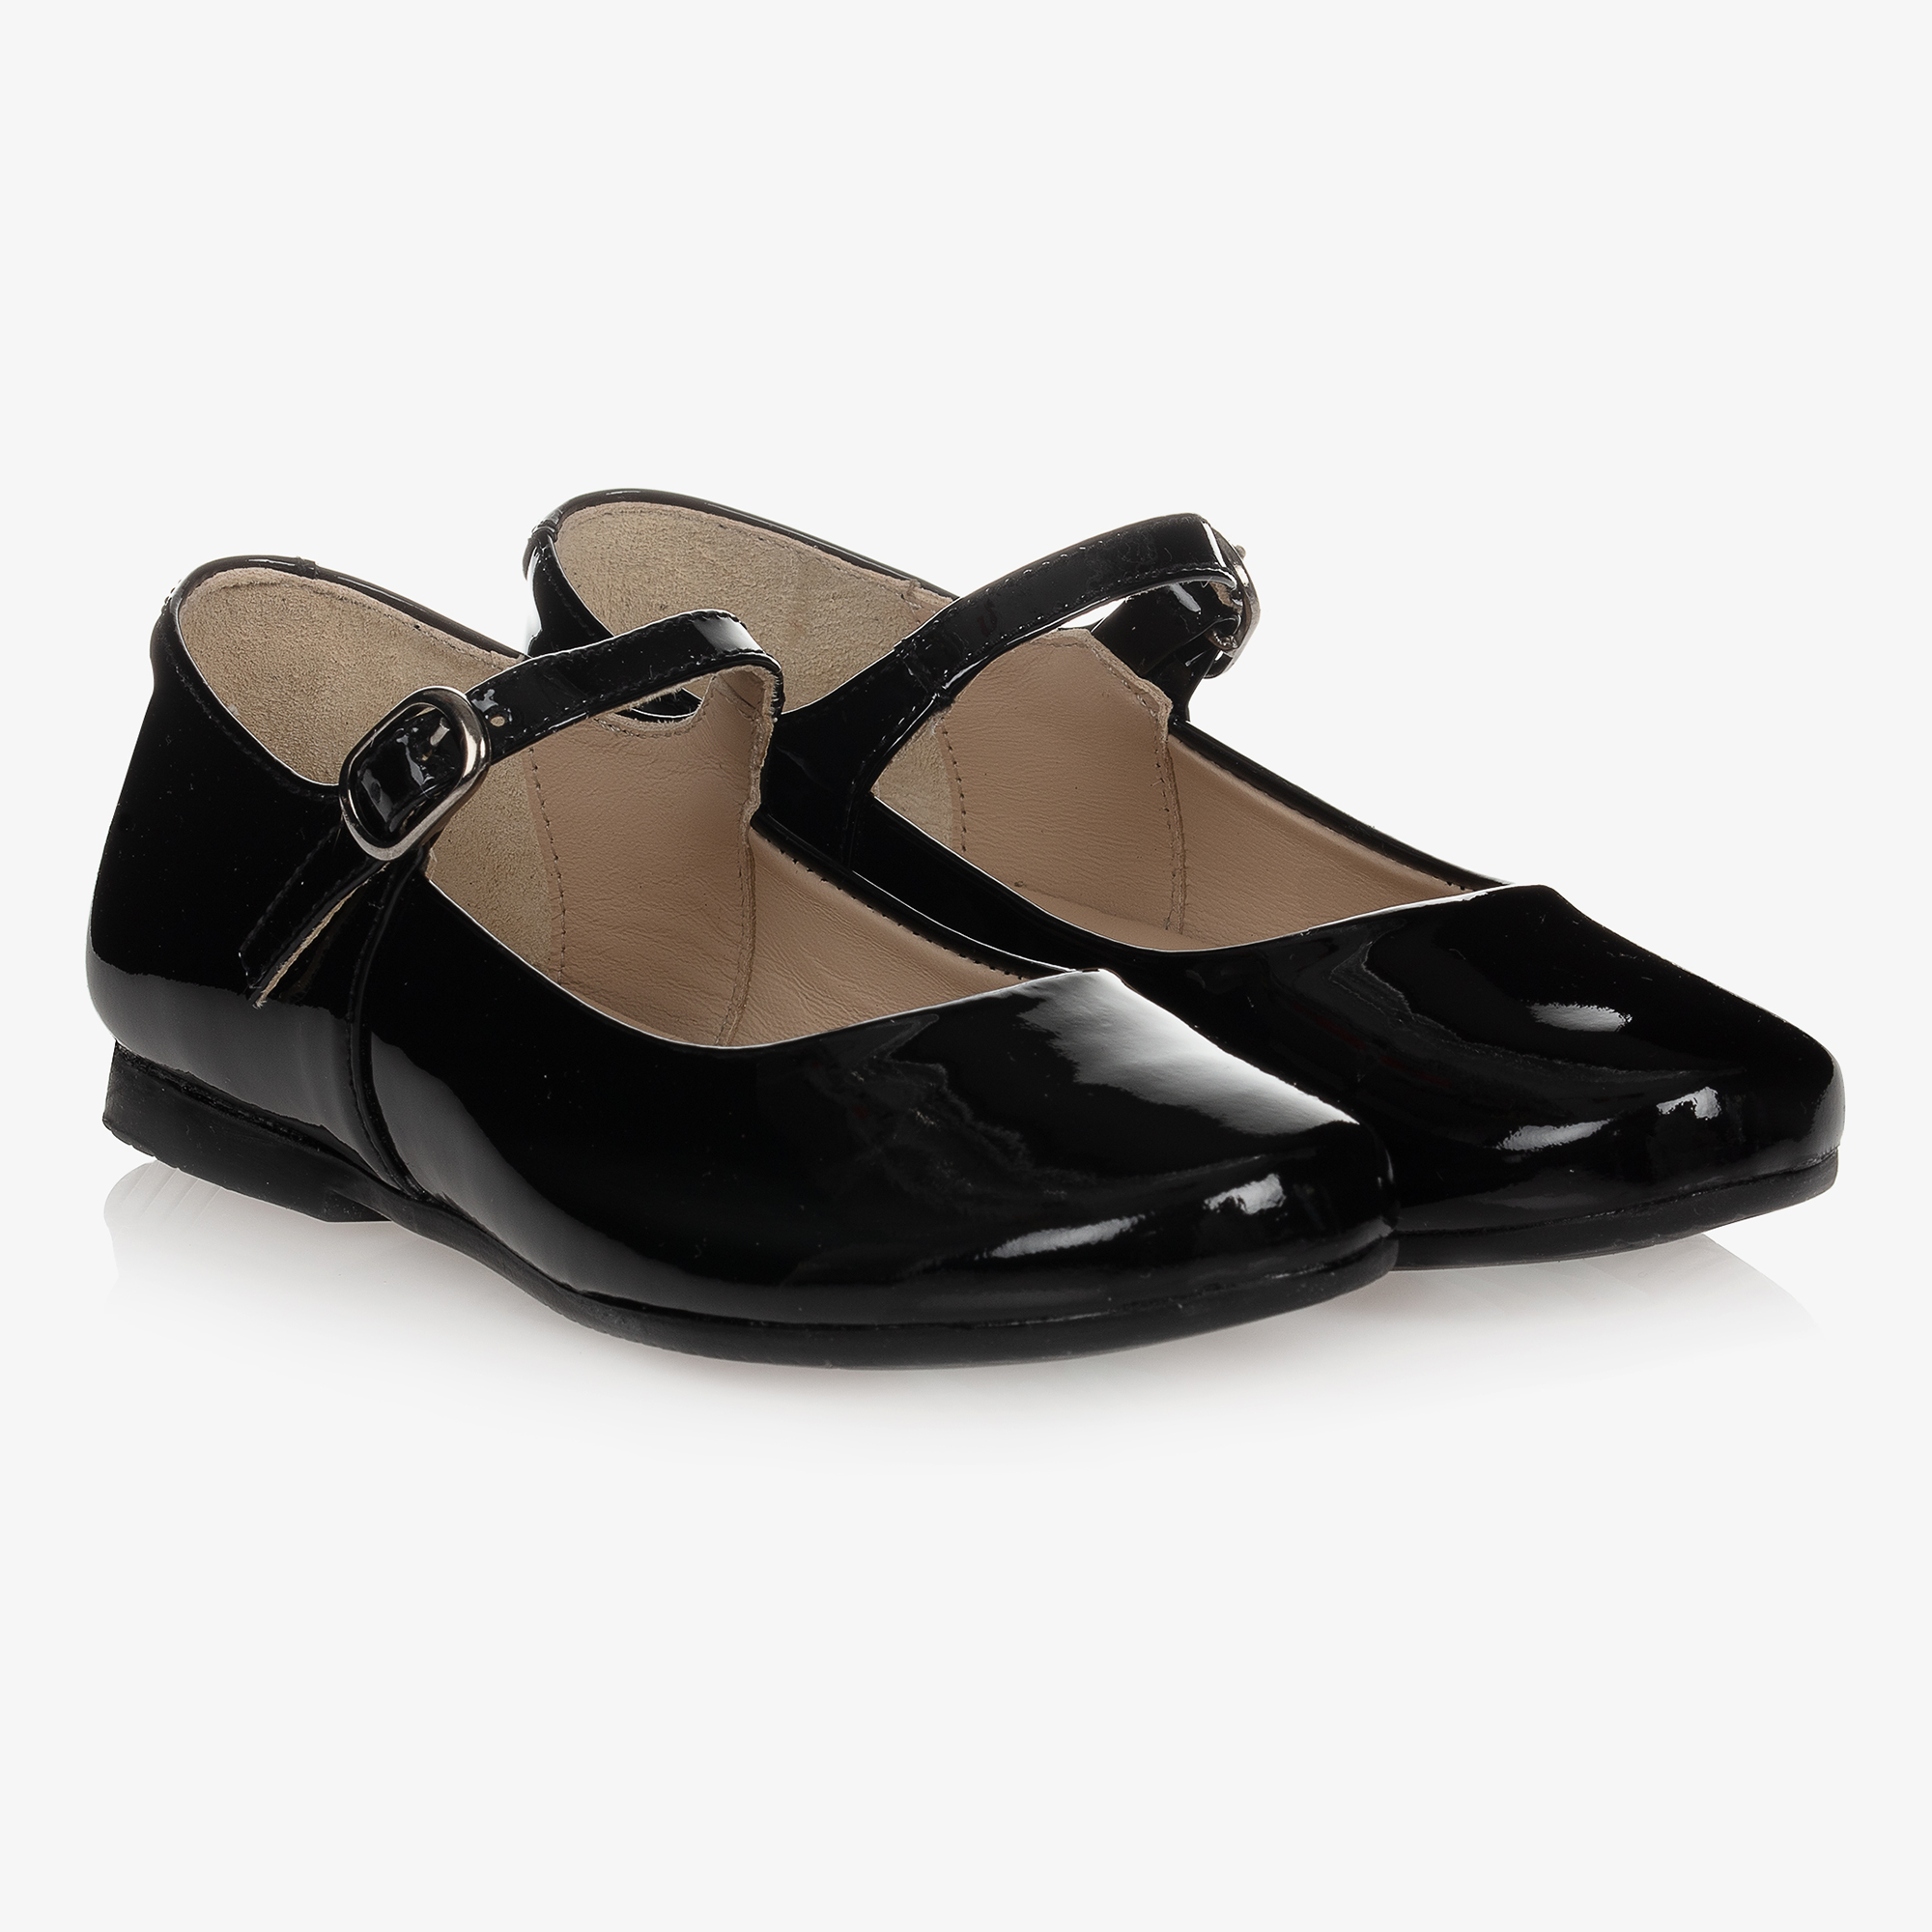 mary jane black patent leather shoes